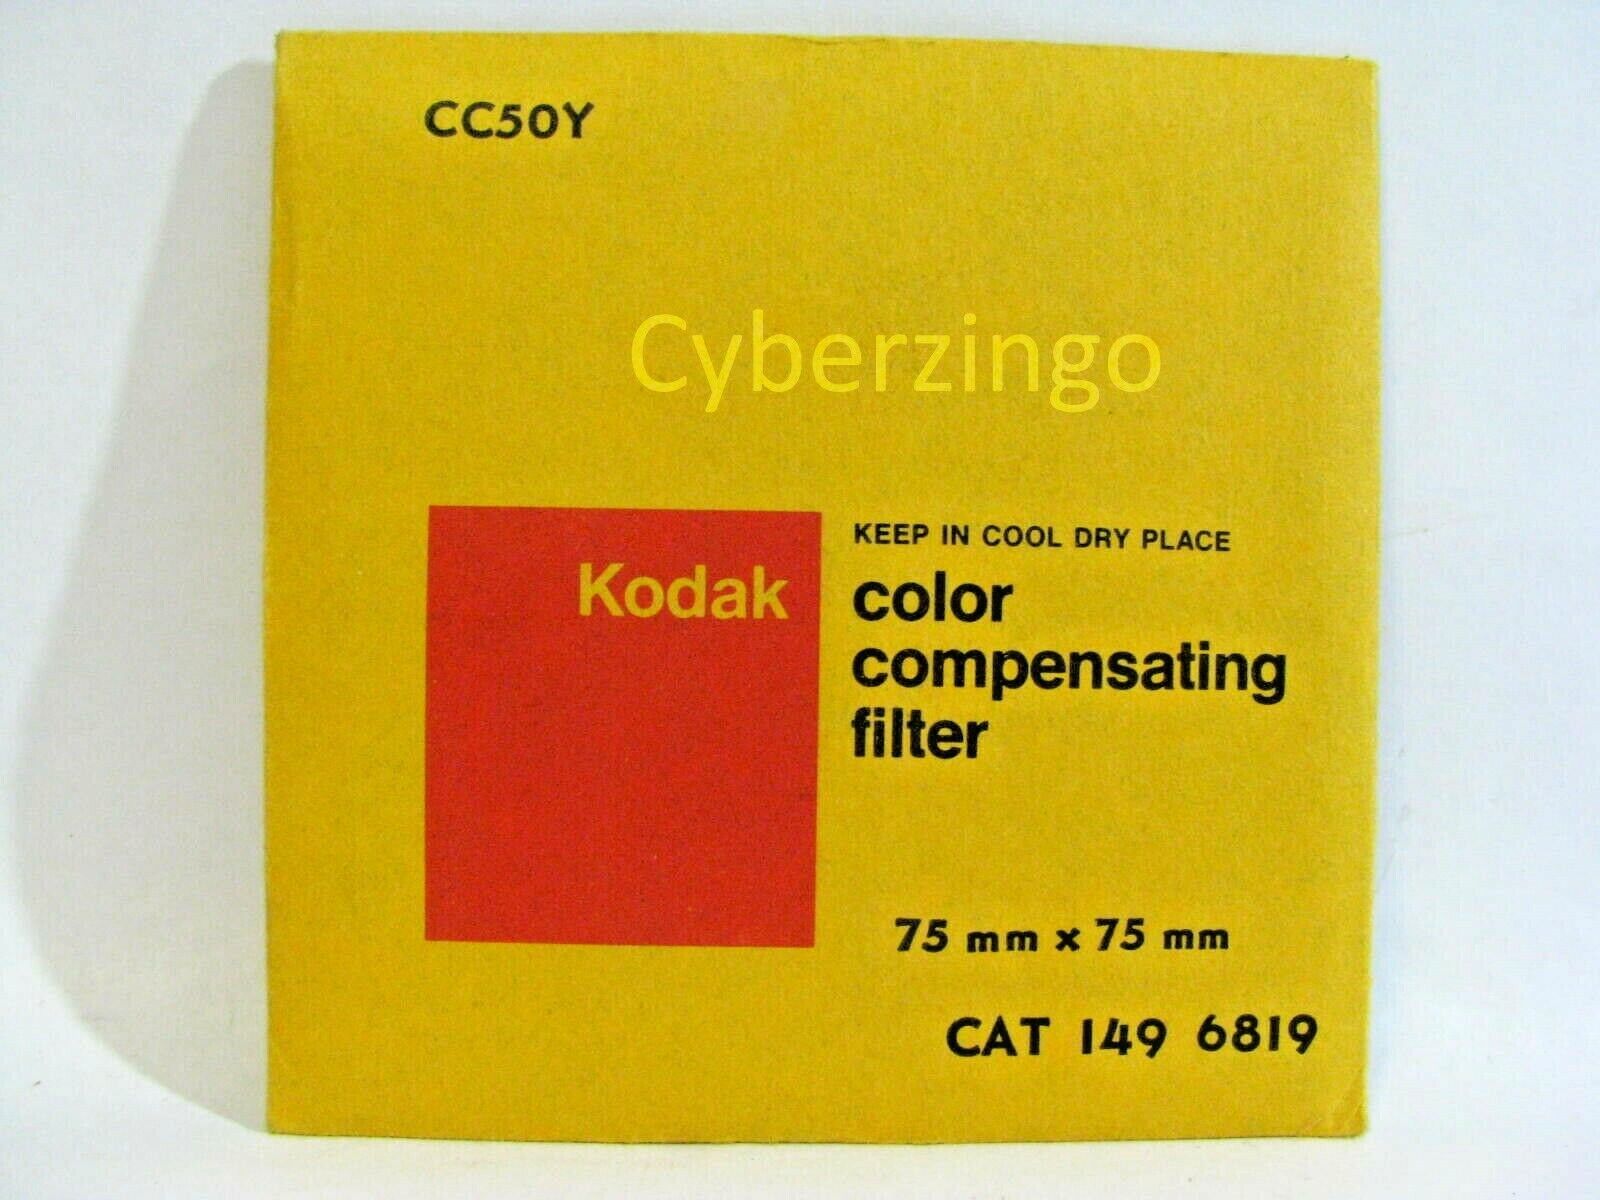 Kodak CC50Y 1496819 Color Compensating 75mm x 75mm Filter NEW OLD STOCK - $15.98